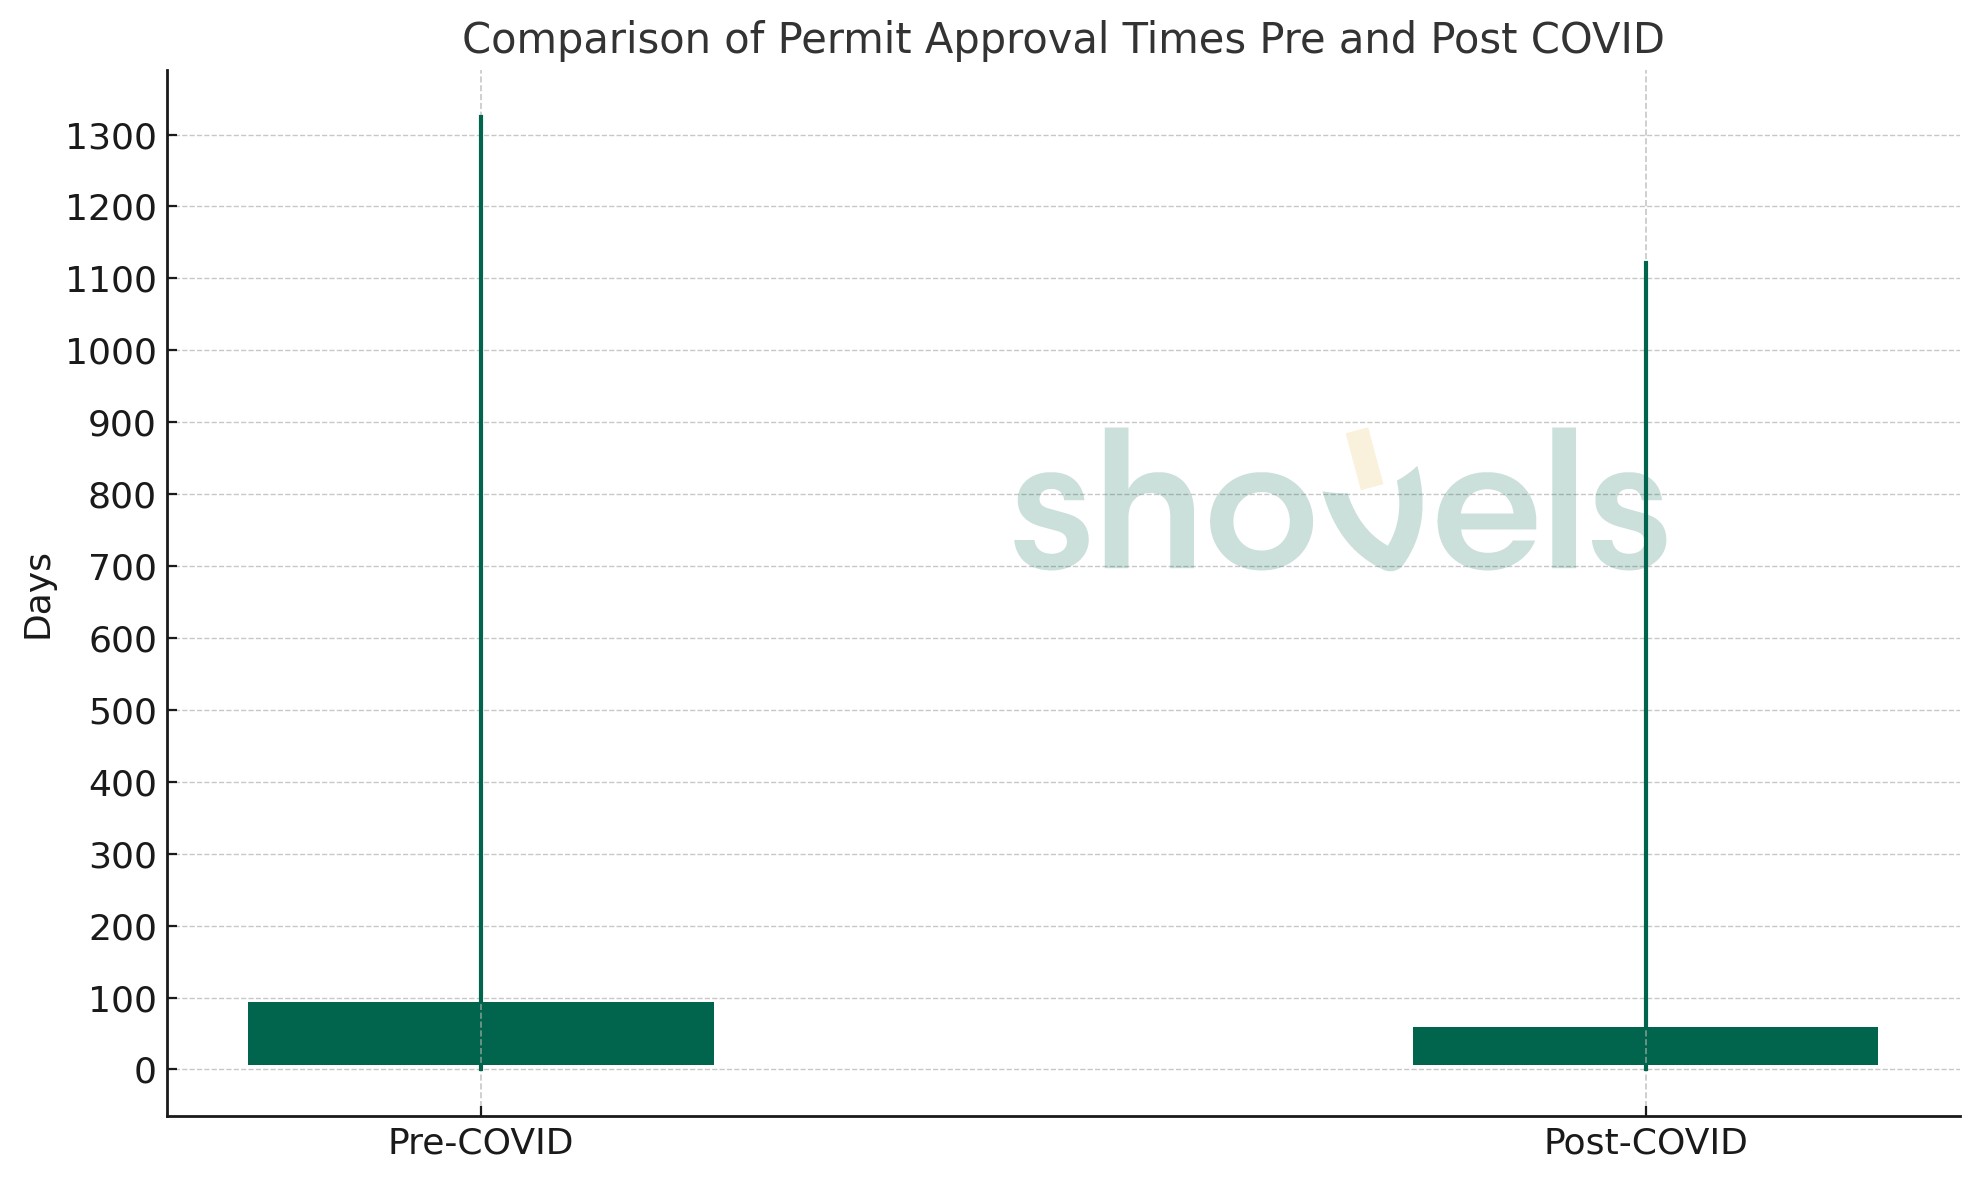 Impact of COVID on permit approval times in California